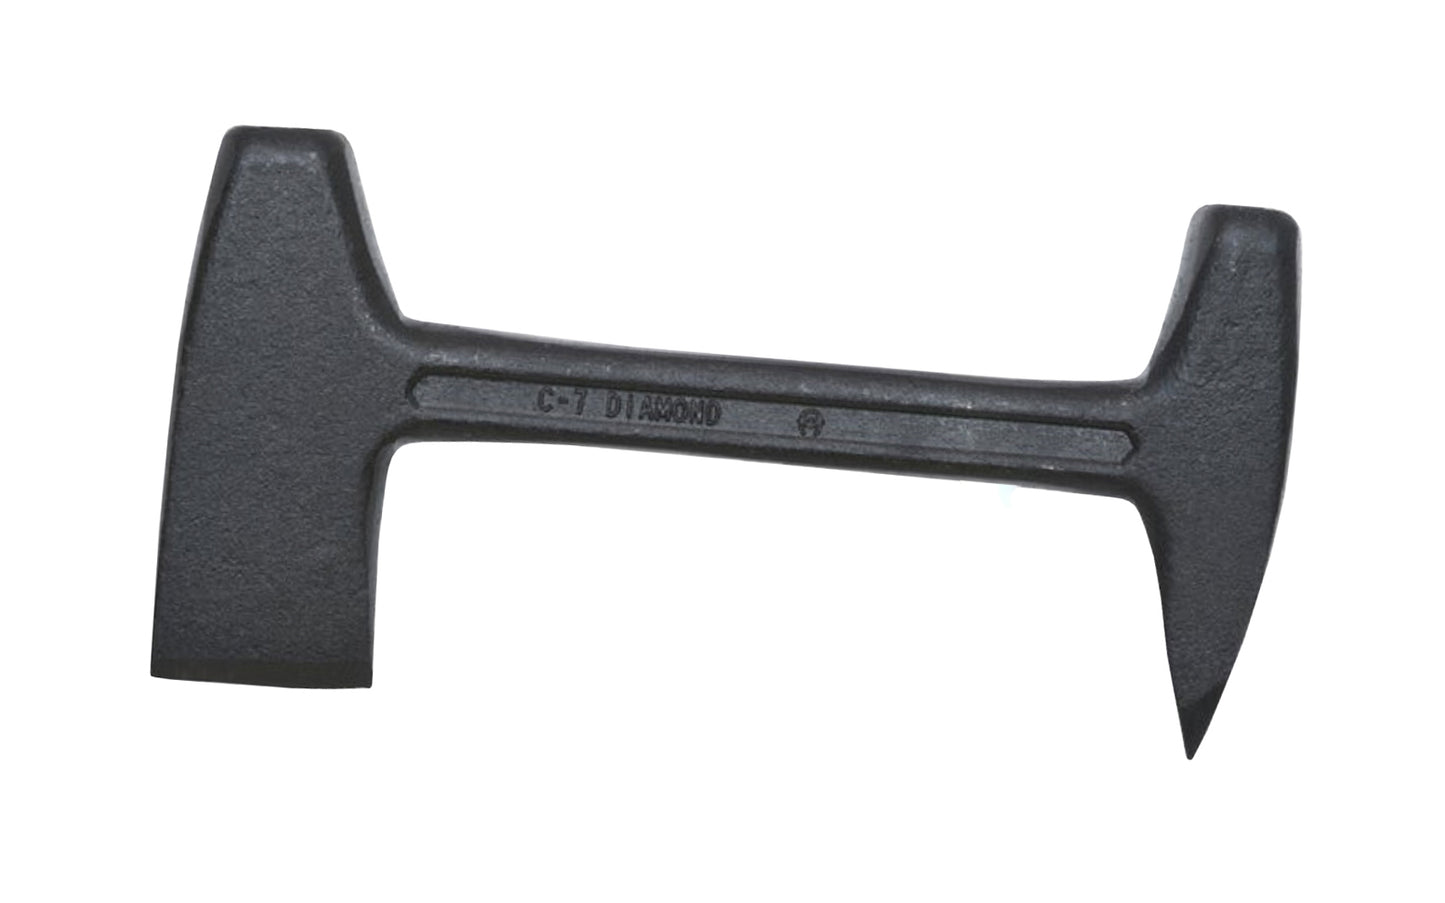 Diamond 6" Steel Clinch Cutter. Forged from high-quality steel. Beveled on outside edge only. Flush inside edge allows for close cutting. An all-purpose tool with one end designed for cutting and the other for use as a pritchel. 2-3/4" Wide x 6" Length. Made by Diamond Tools. Model DCTR. Made in Germany.